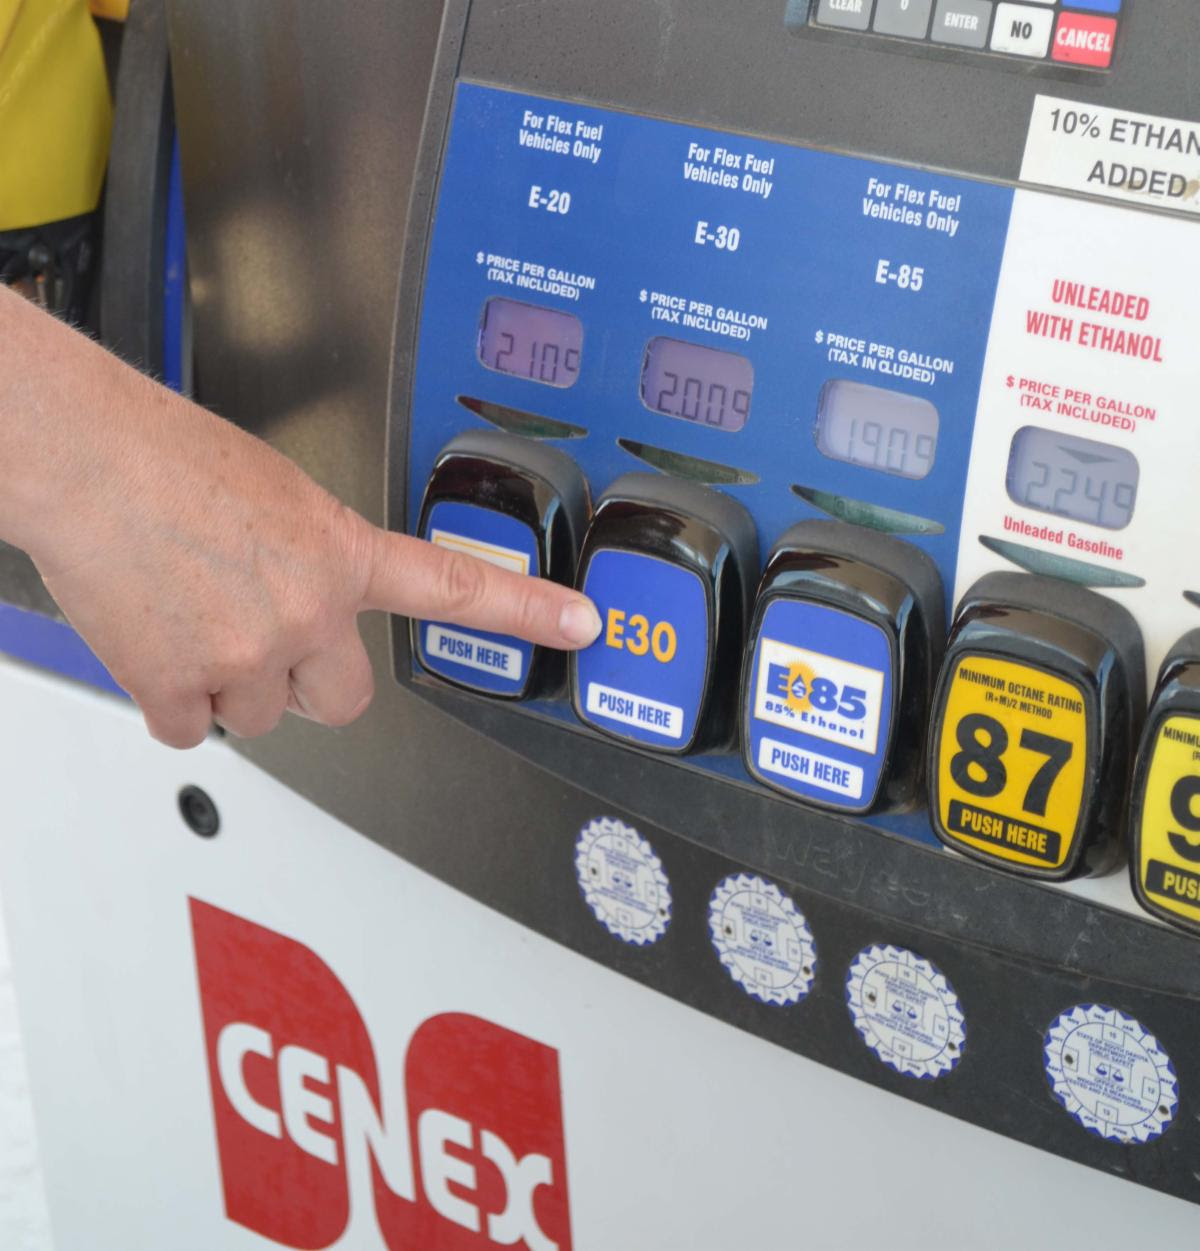 Mid-morning Ag News, September 9, 2021: Gas, Diesel Prices at Highest Point in Seven Years